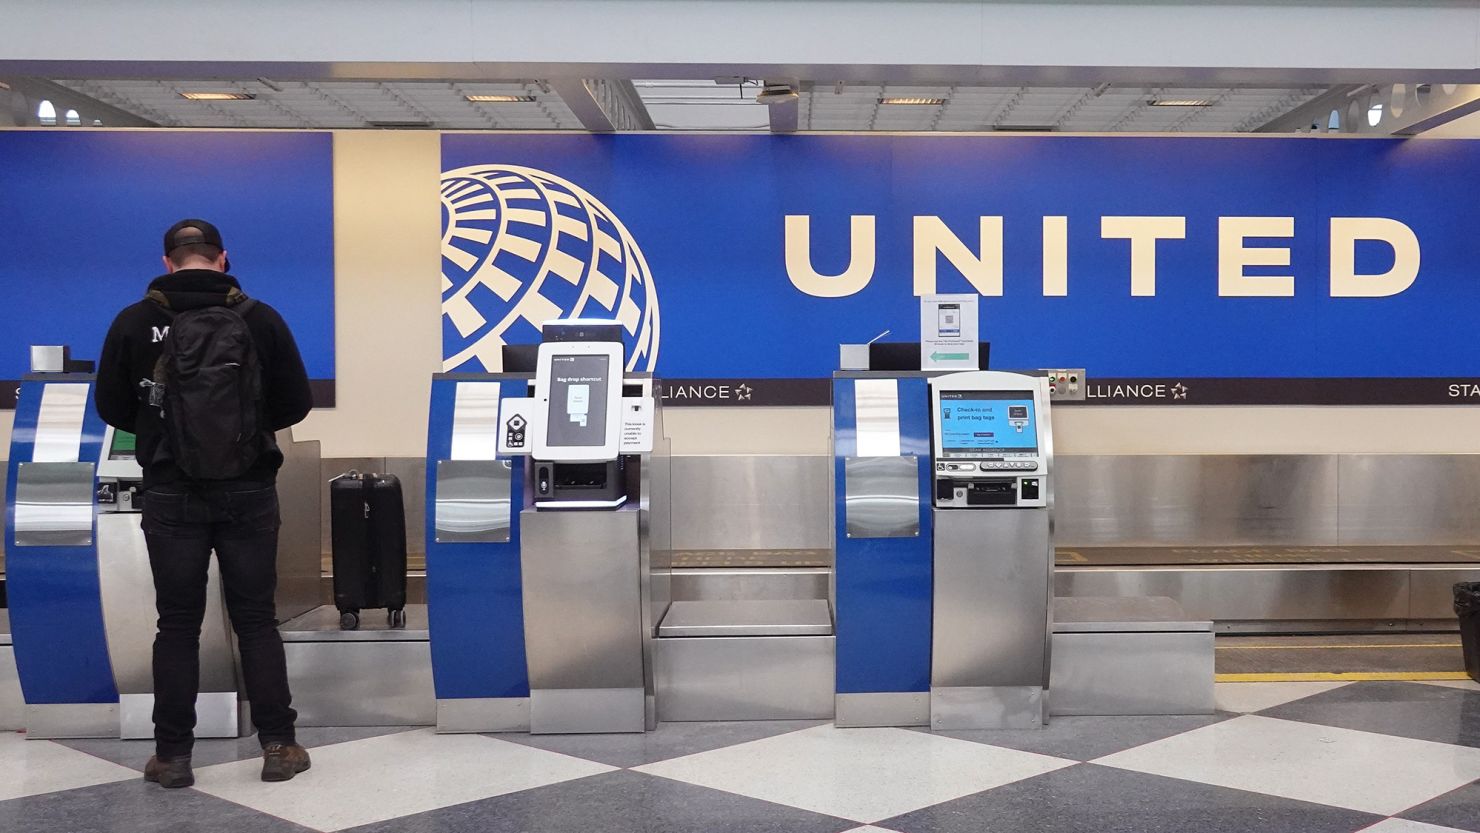 Passengers check in for United Airlines flights at O'Hare International Airport in January. The airline said the grounding of its fleet of Boeing 737 Max 9 jets due to the blowout of a door plug on an Alaska Airlines flight cost it $200 million.